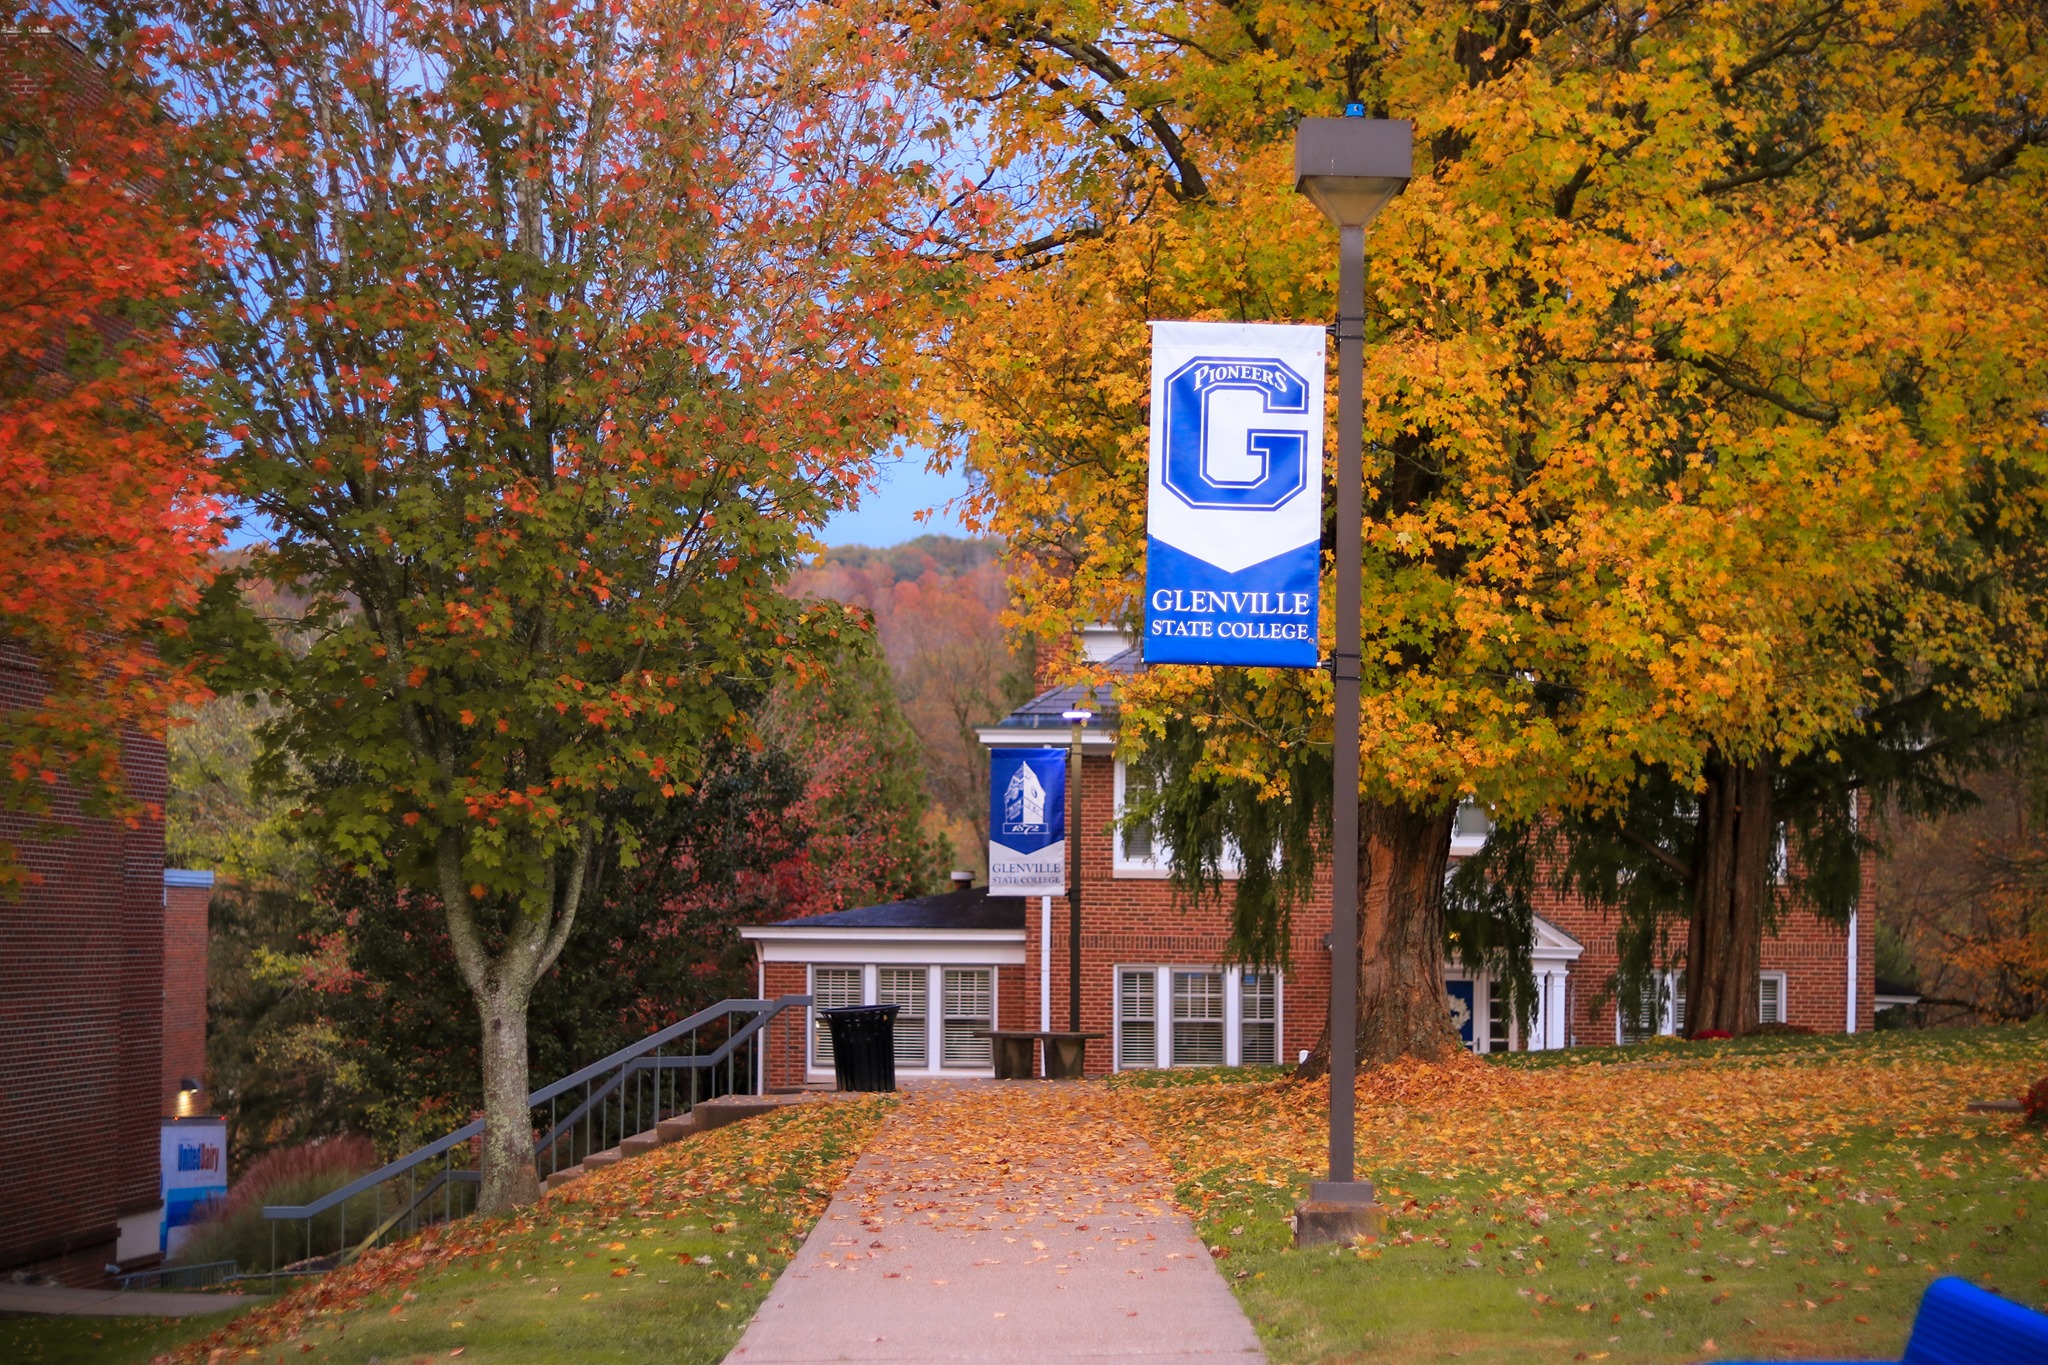 Brilliant yellow, orange, and red trees line a campus walkway which features lamp posts hung with bright blue GSC banners.